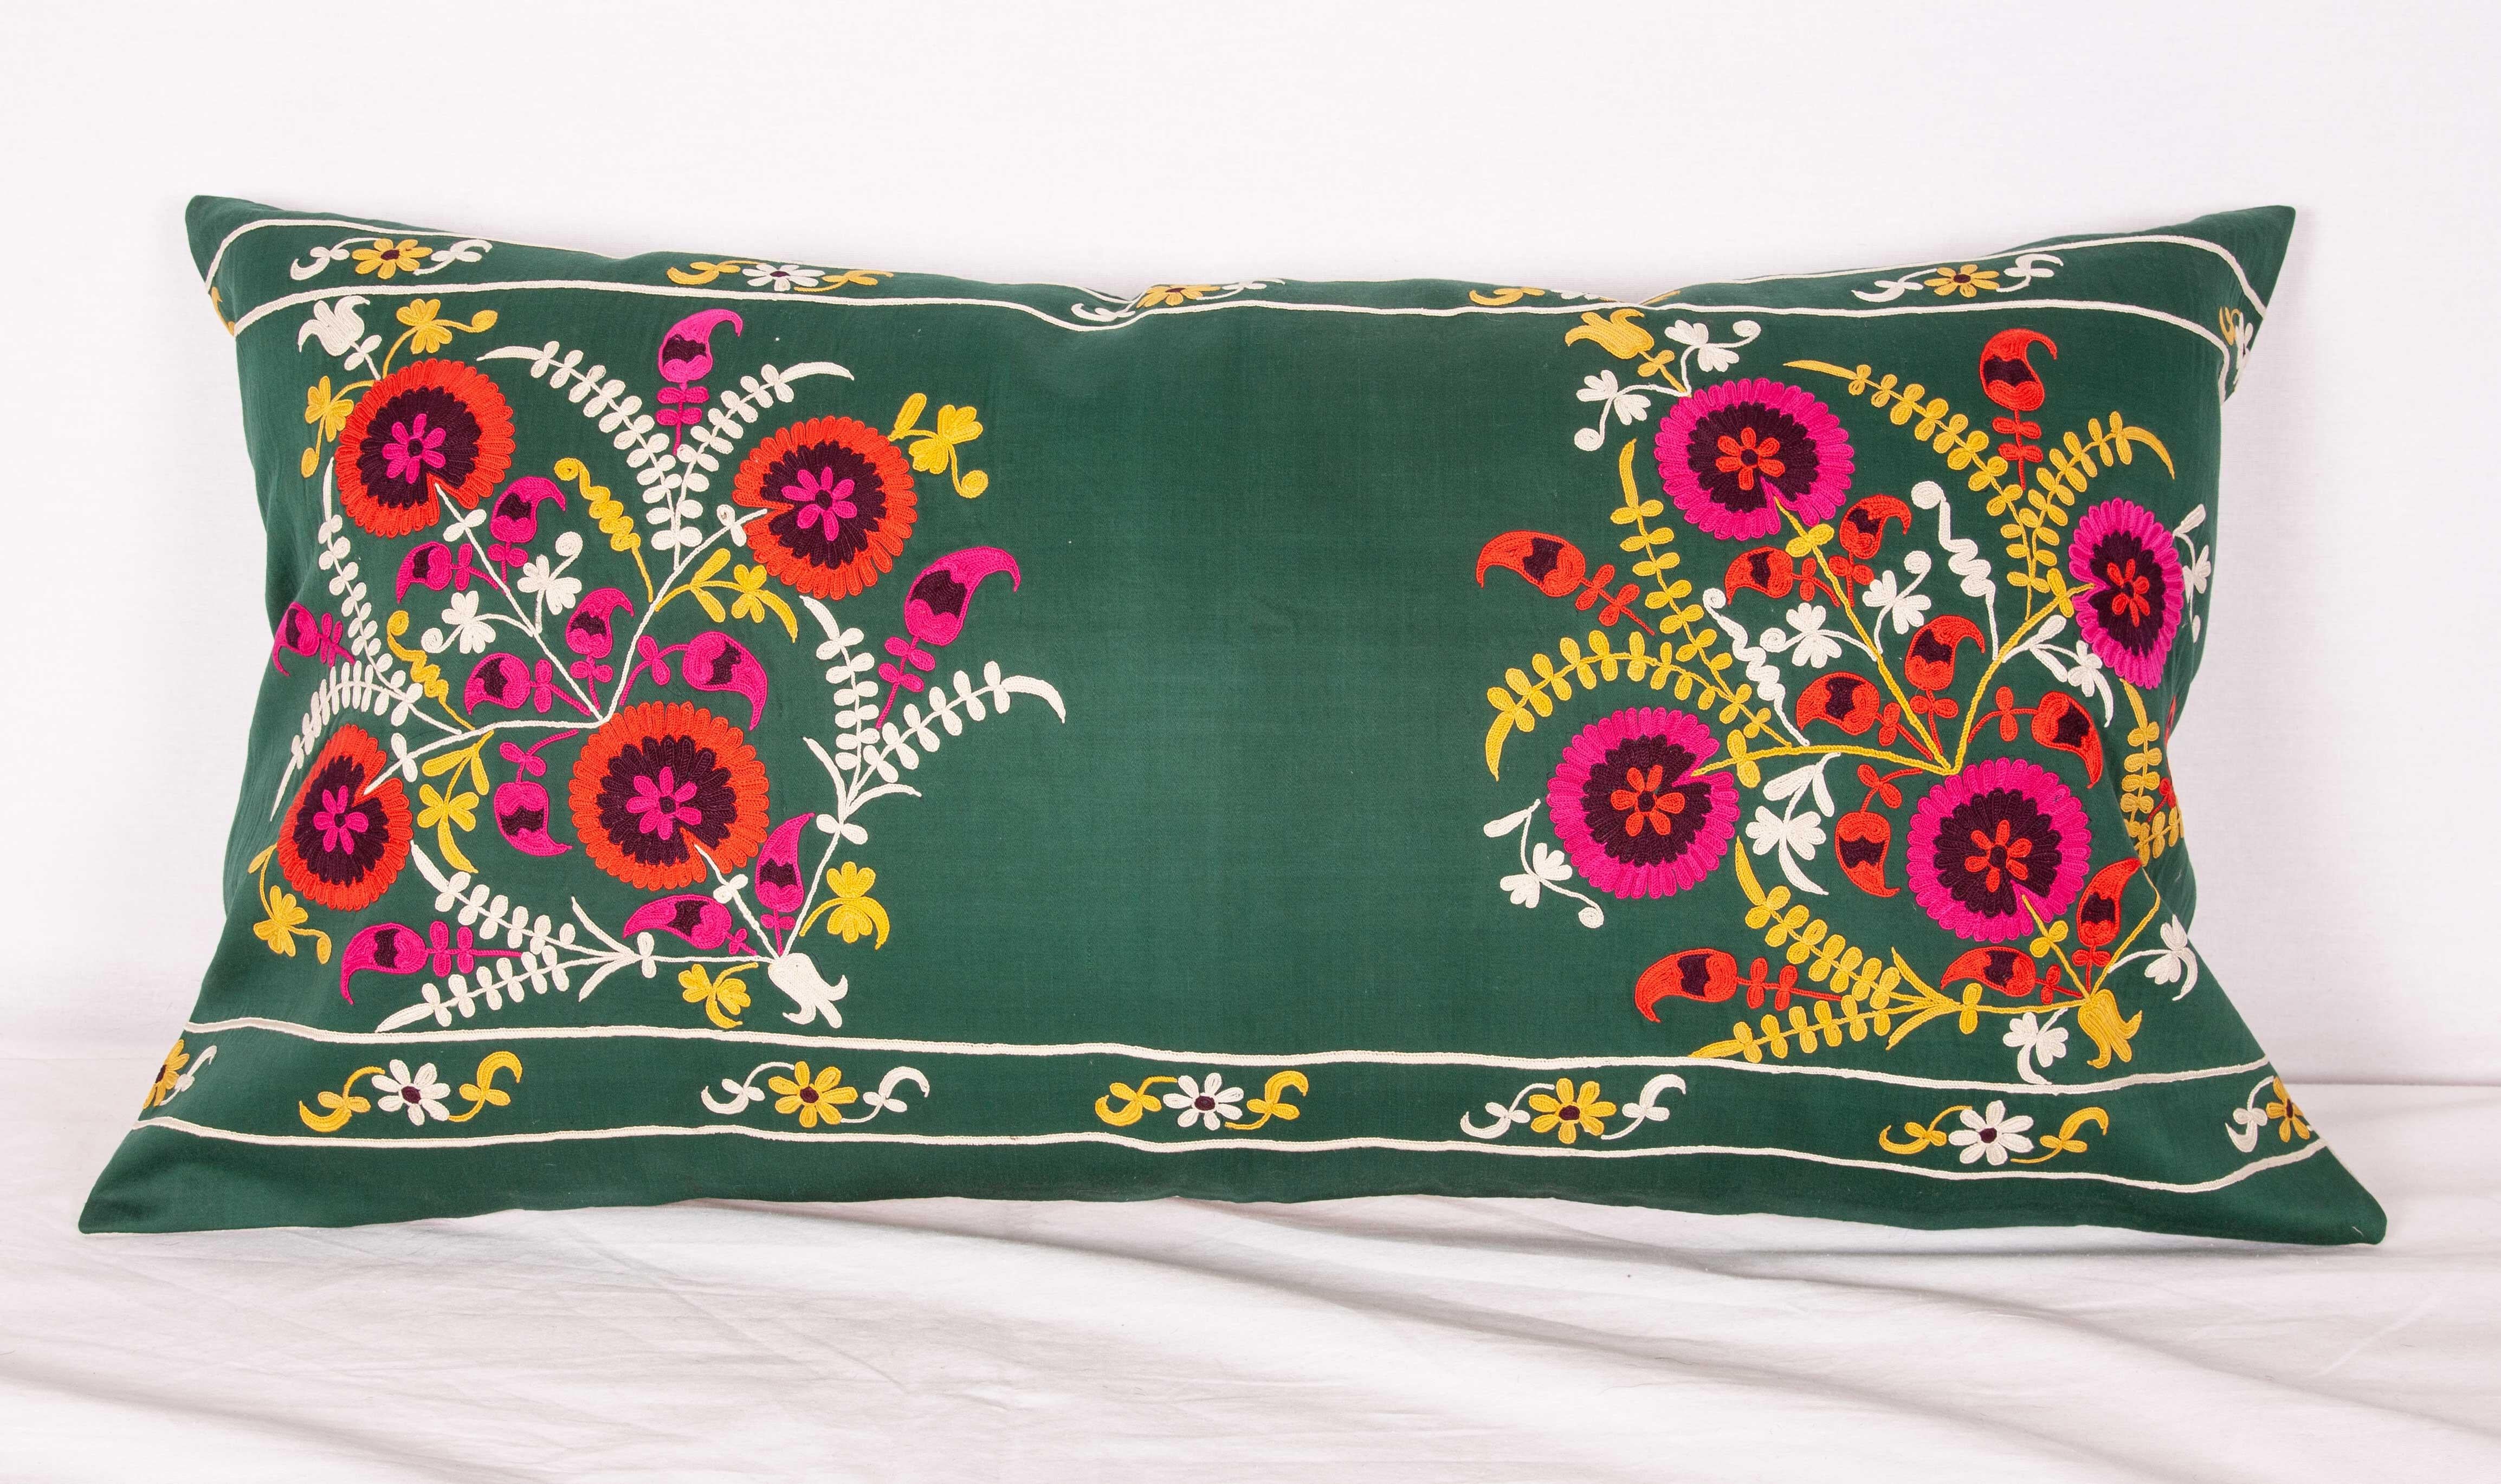 Vintage Suzani Pillow Case, Cuhion Cover, Mid-20th Century 1